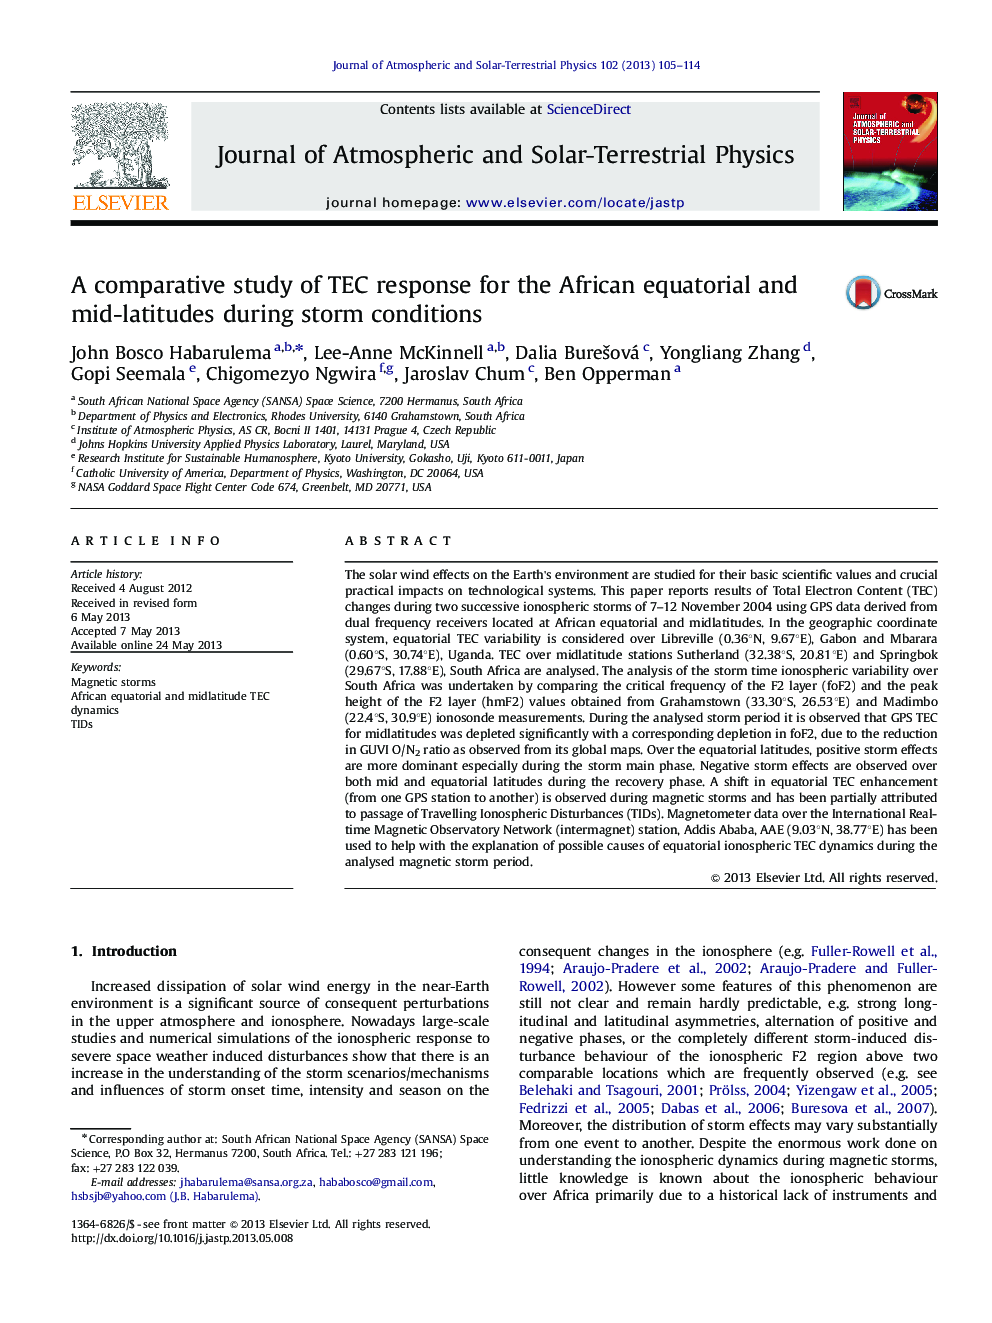 A comparative study of TEC response for the African equatorial and mid-latitudes during storm conditions